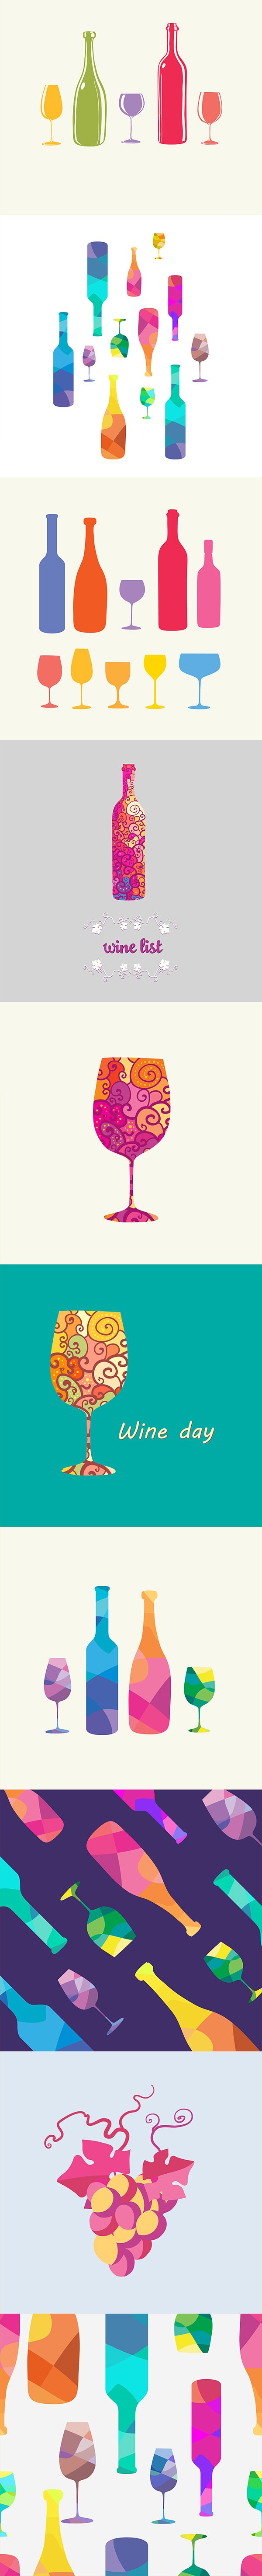 Wine bottle and a wineglasses preview image.